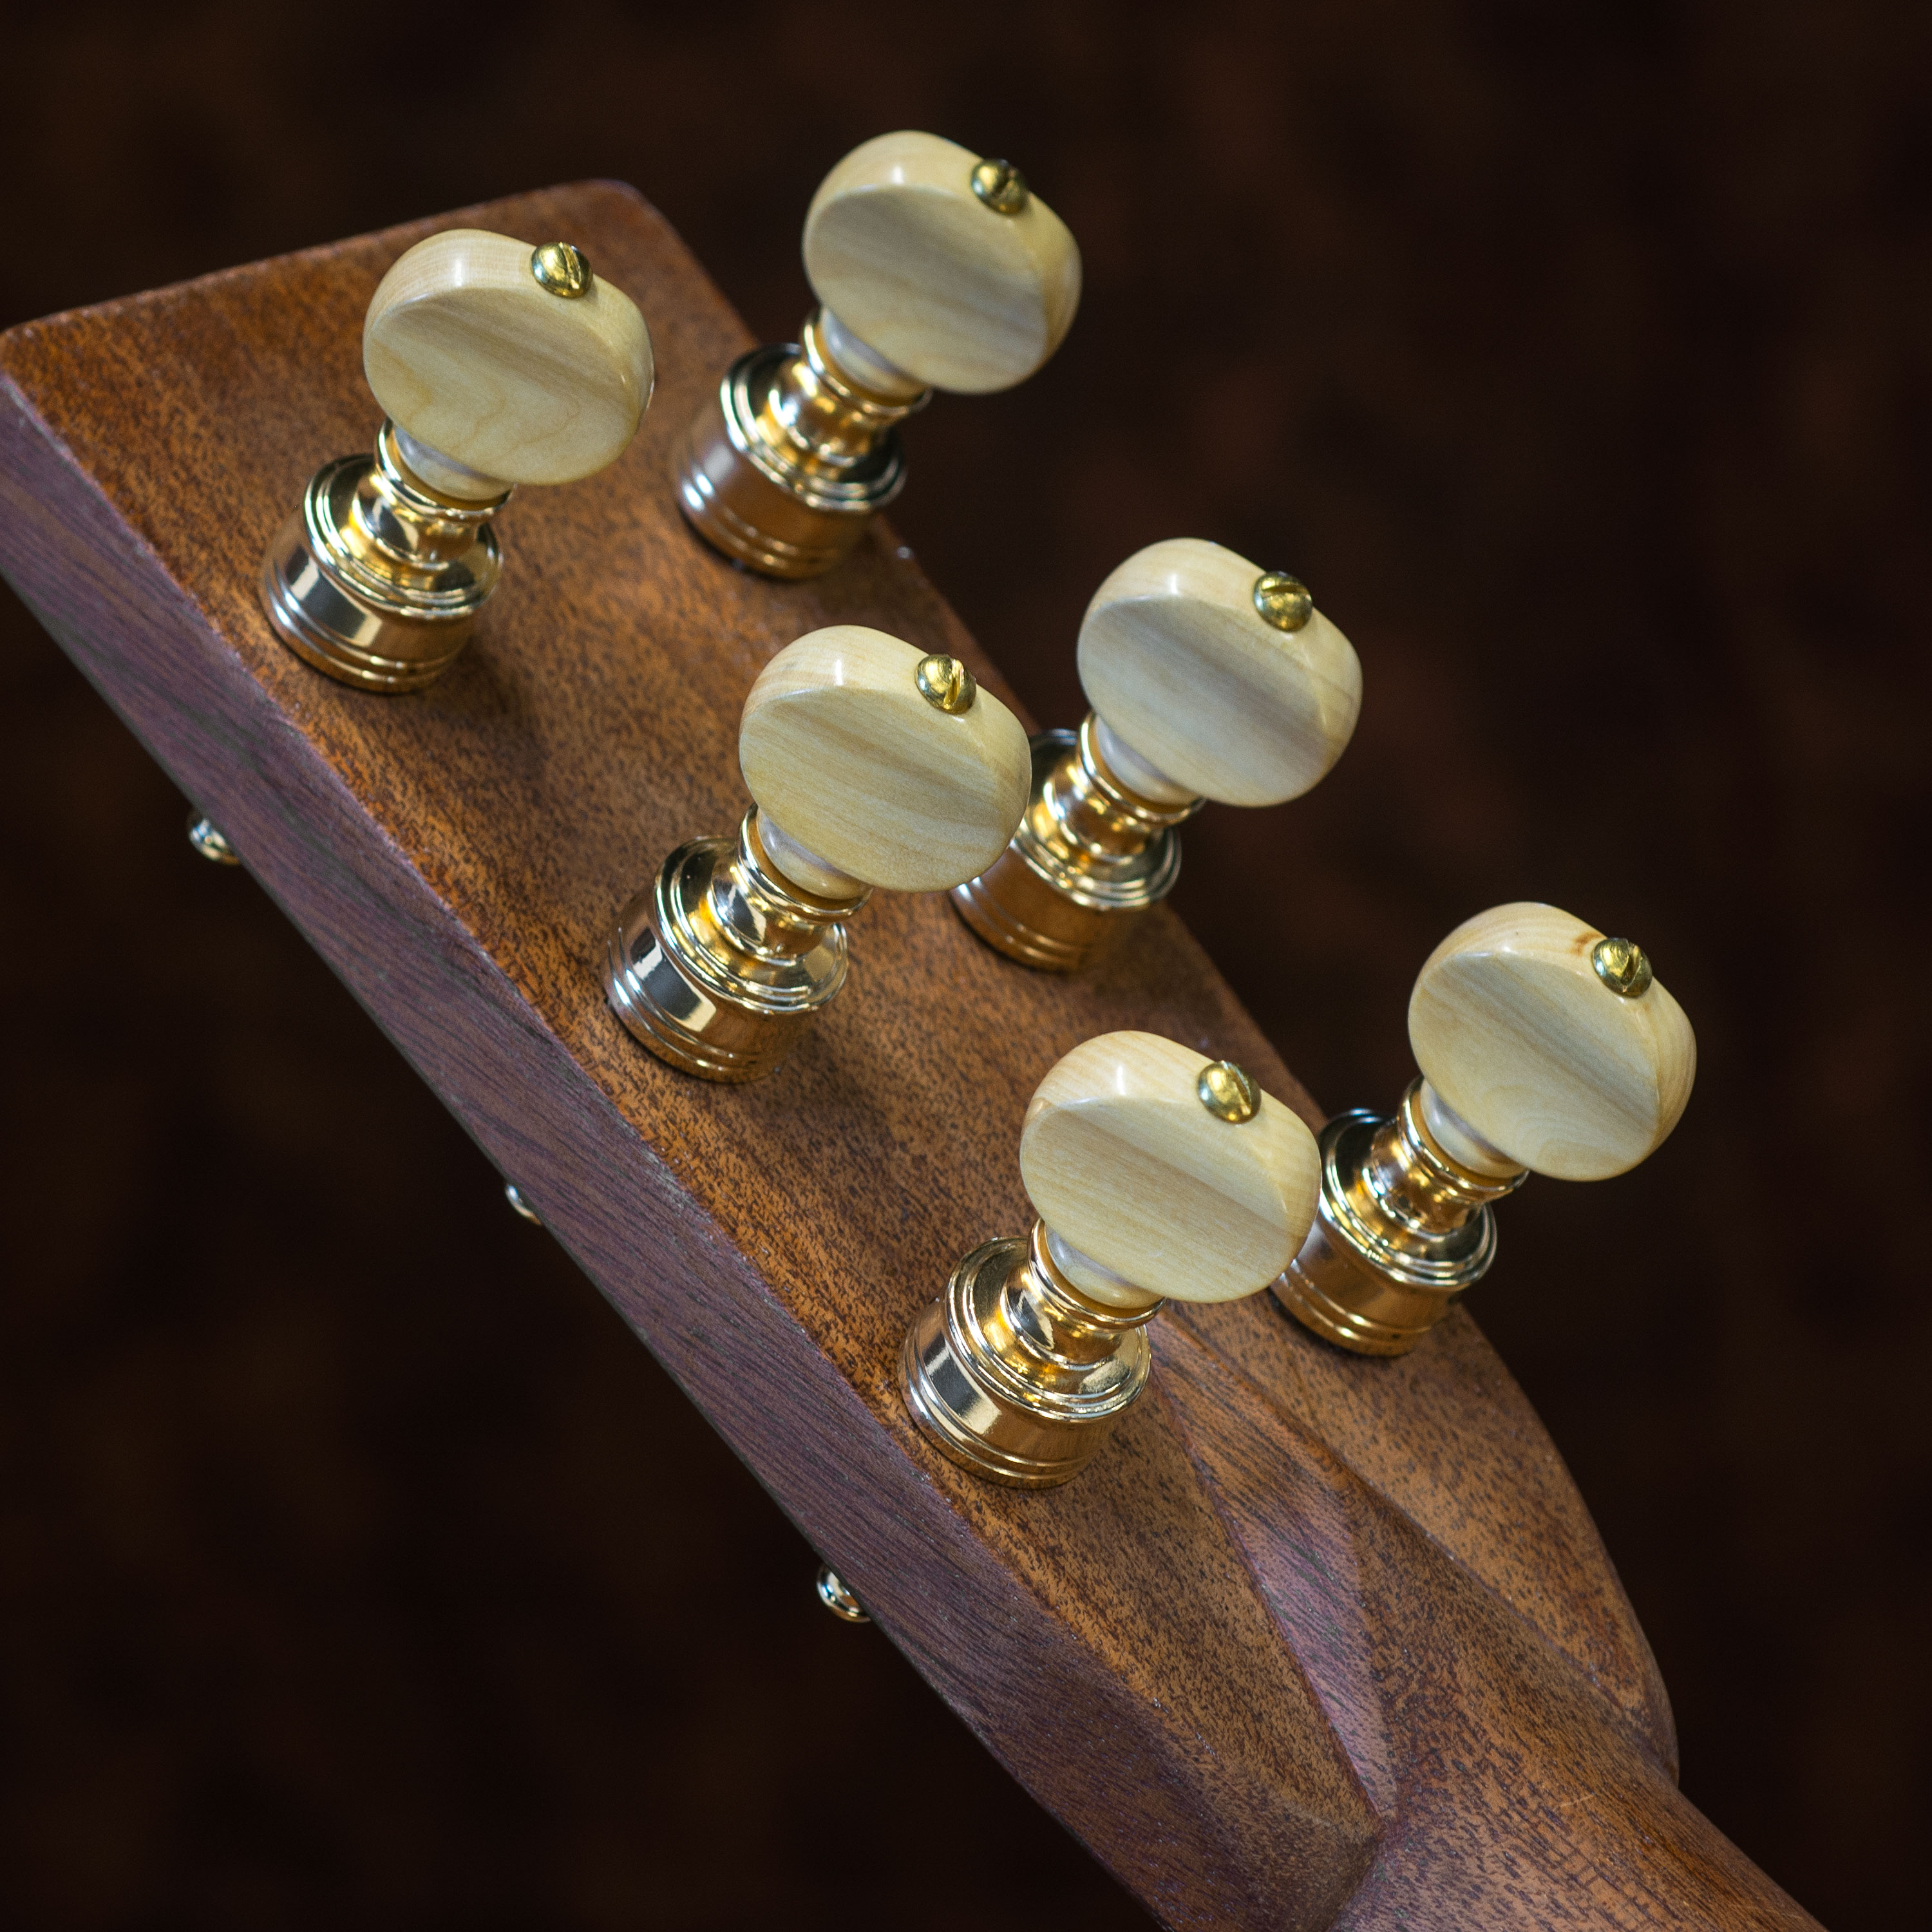 Rickard Cyclone High Ratio Tuning Pegs for Guitar with Boxwood Knobs, Set of 6